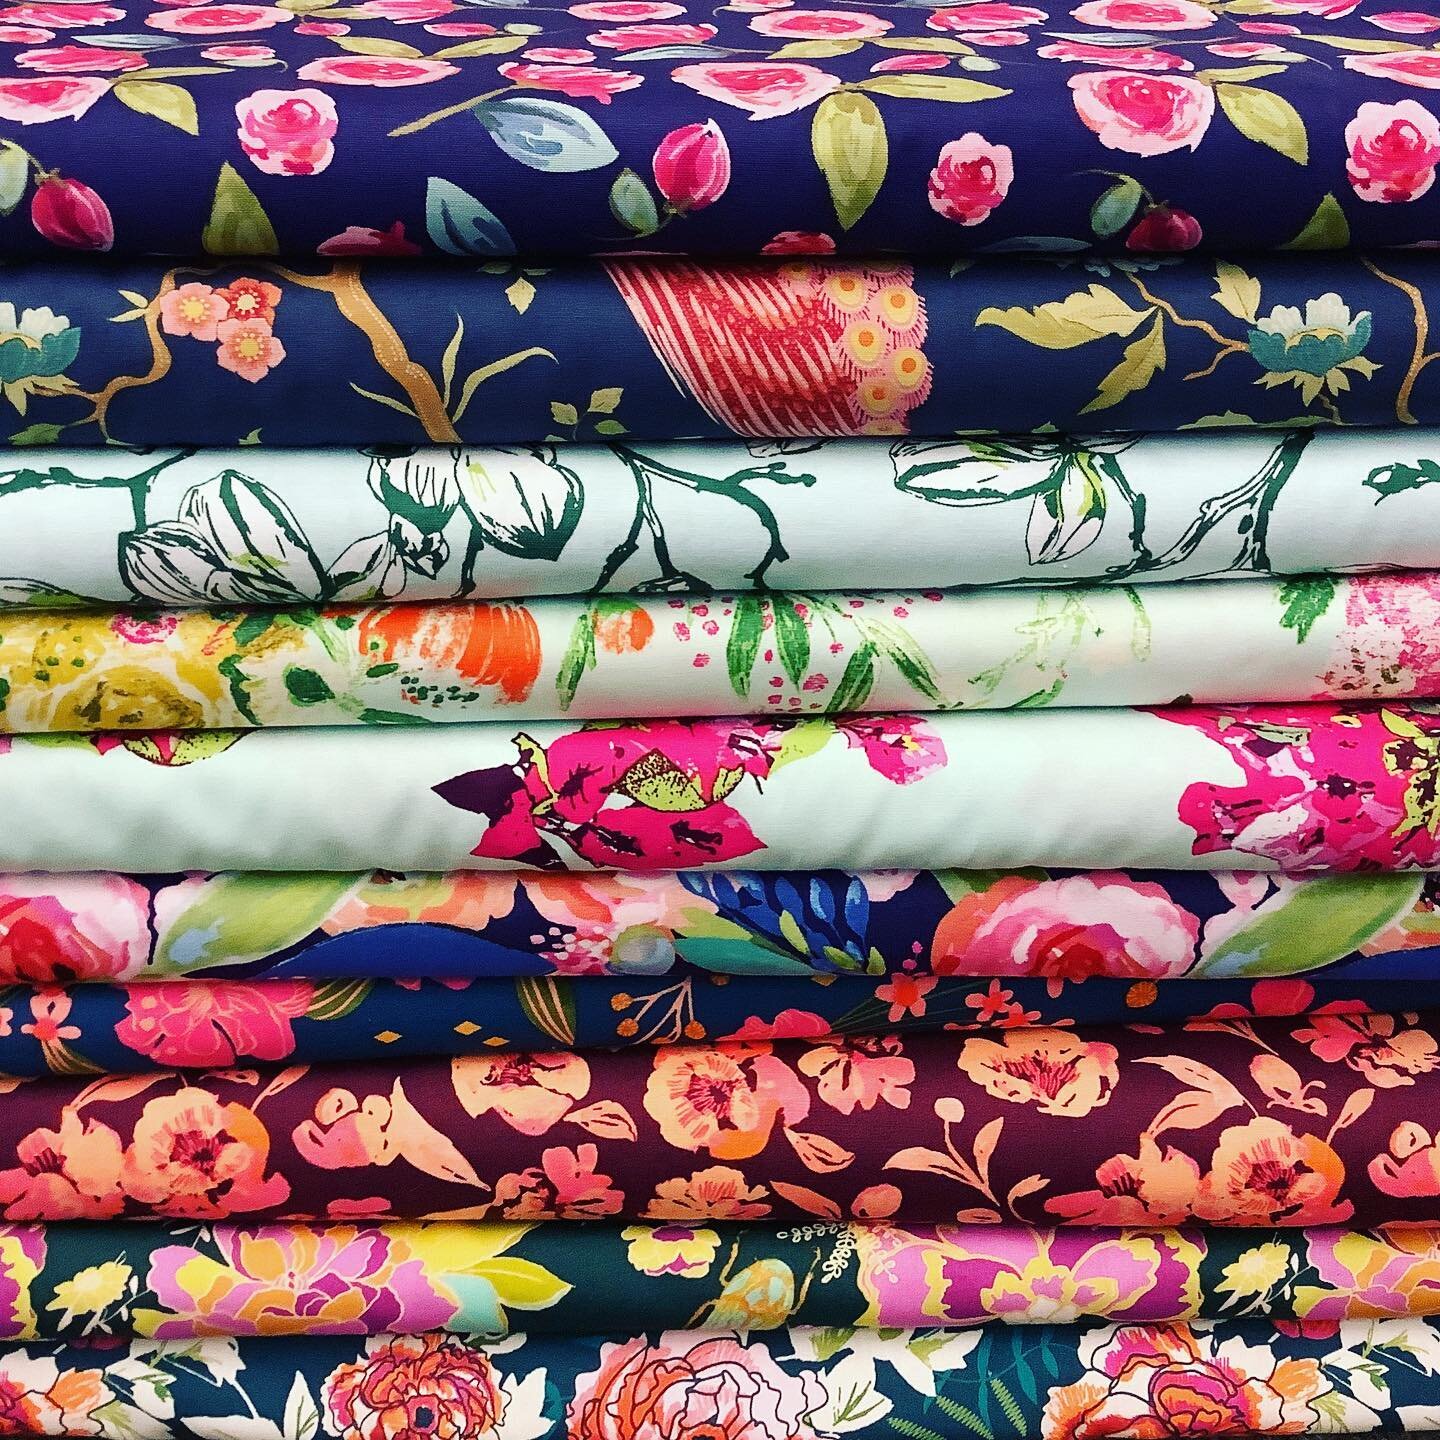 Blowsy and beautiful! 🌺 With 1800 fabrics at Hometown, we love mixing up patterns from different manufacturers for a one-of-a-kind selection, not found at other quilt shops.

This gorgeous FQ bundle has lovely prints from Windham, Tilda, Art Gallery